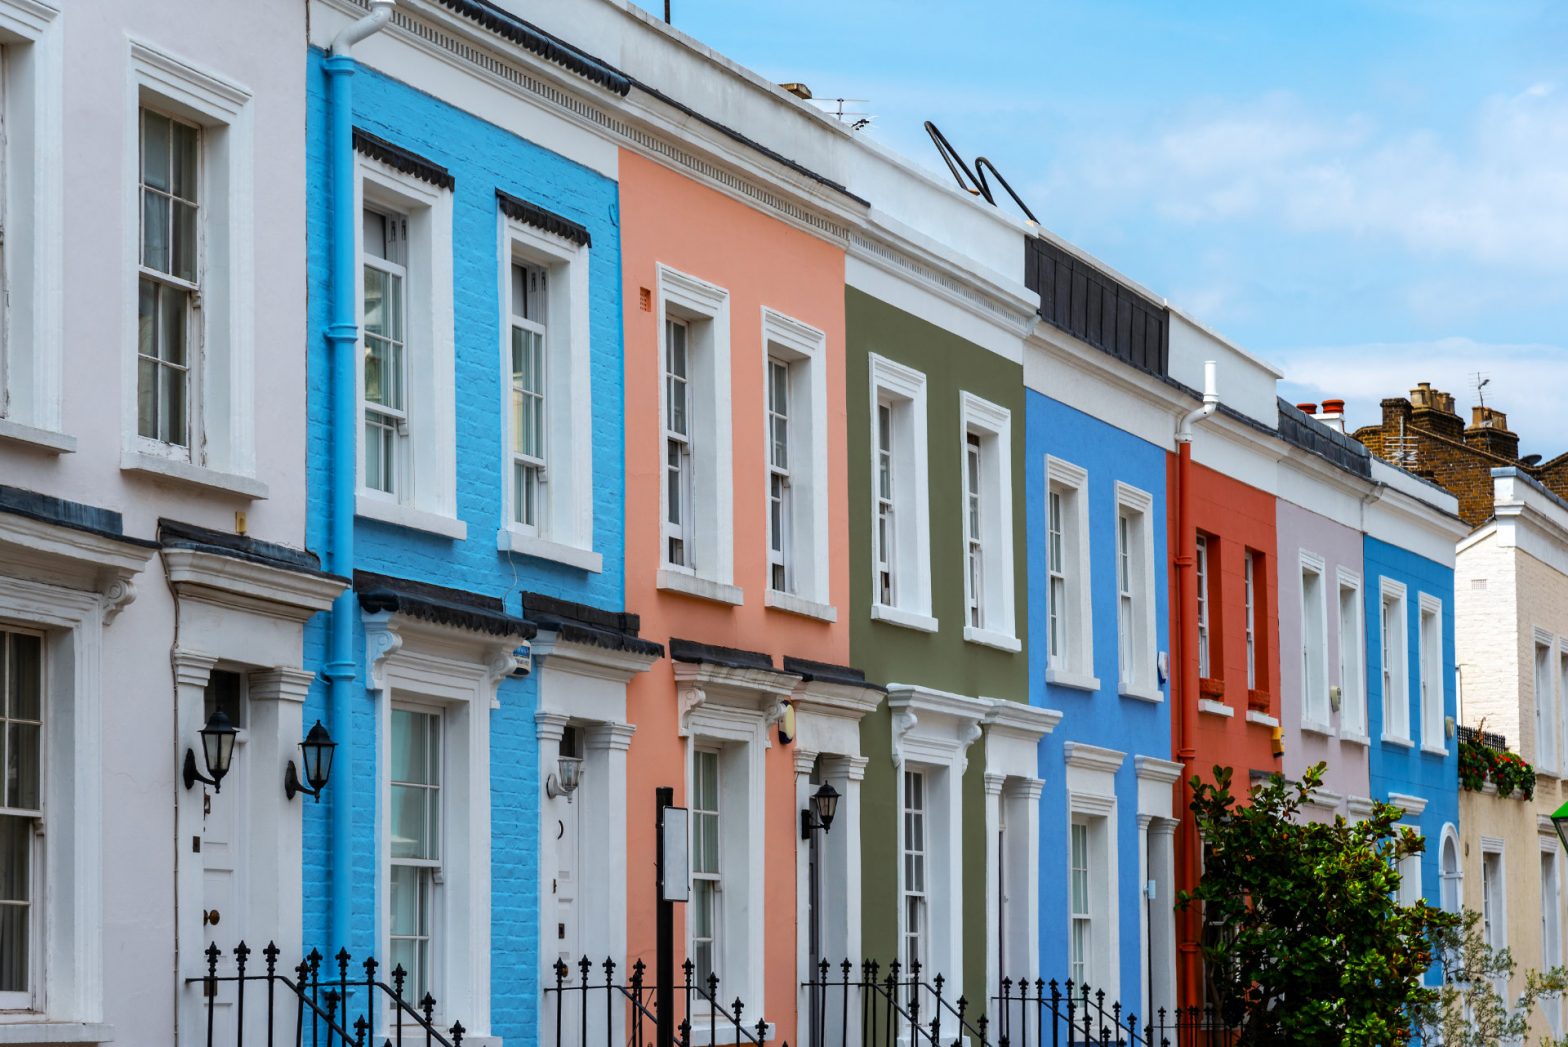 A row of colourful residential properties containing leasehold flats